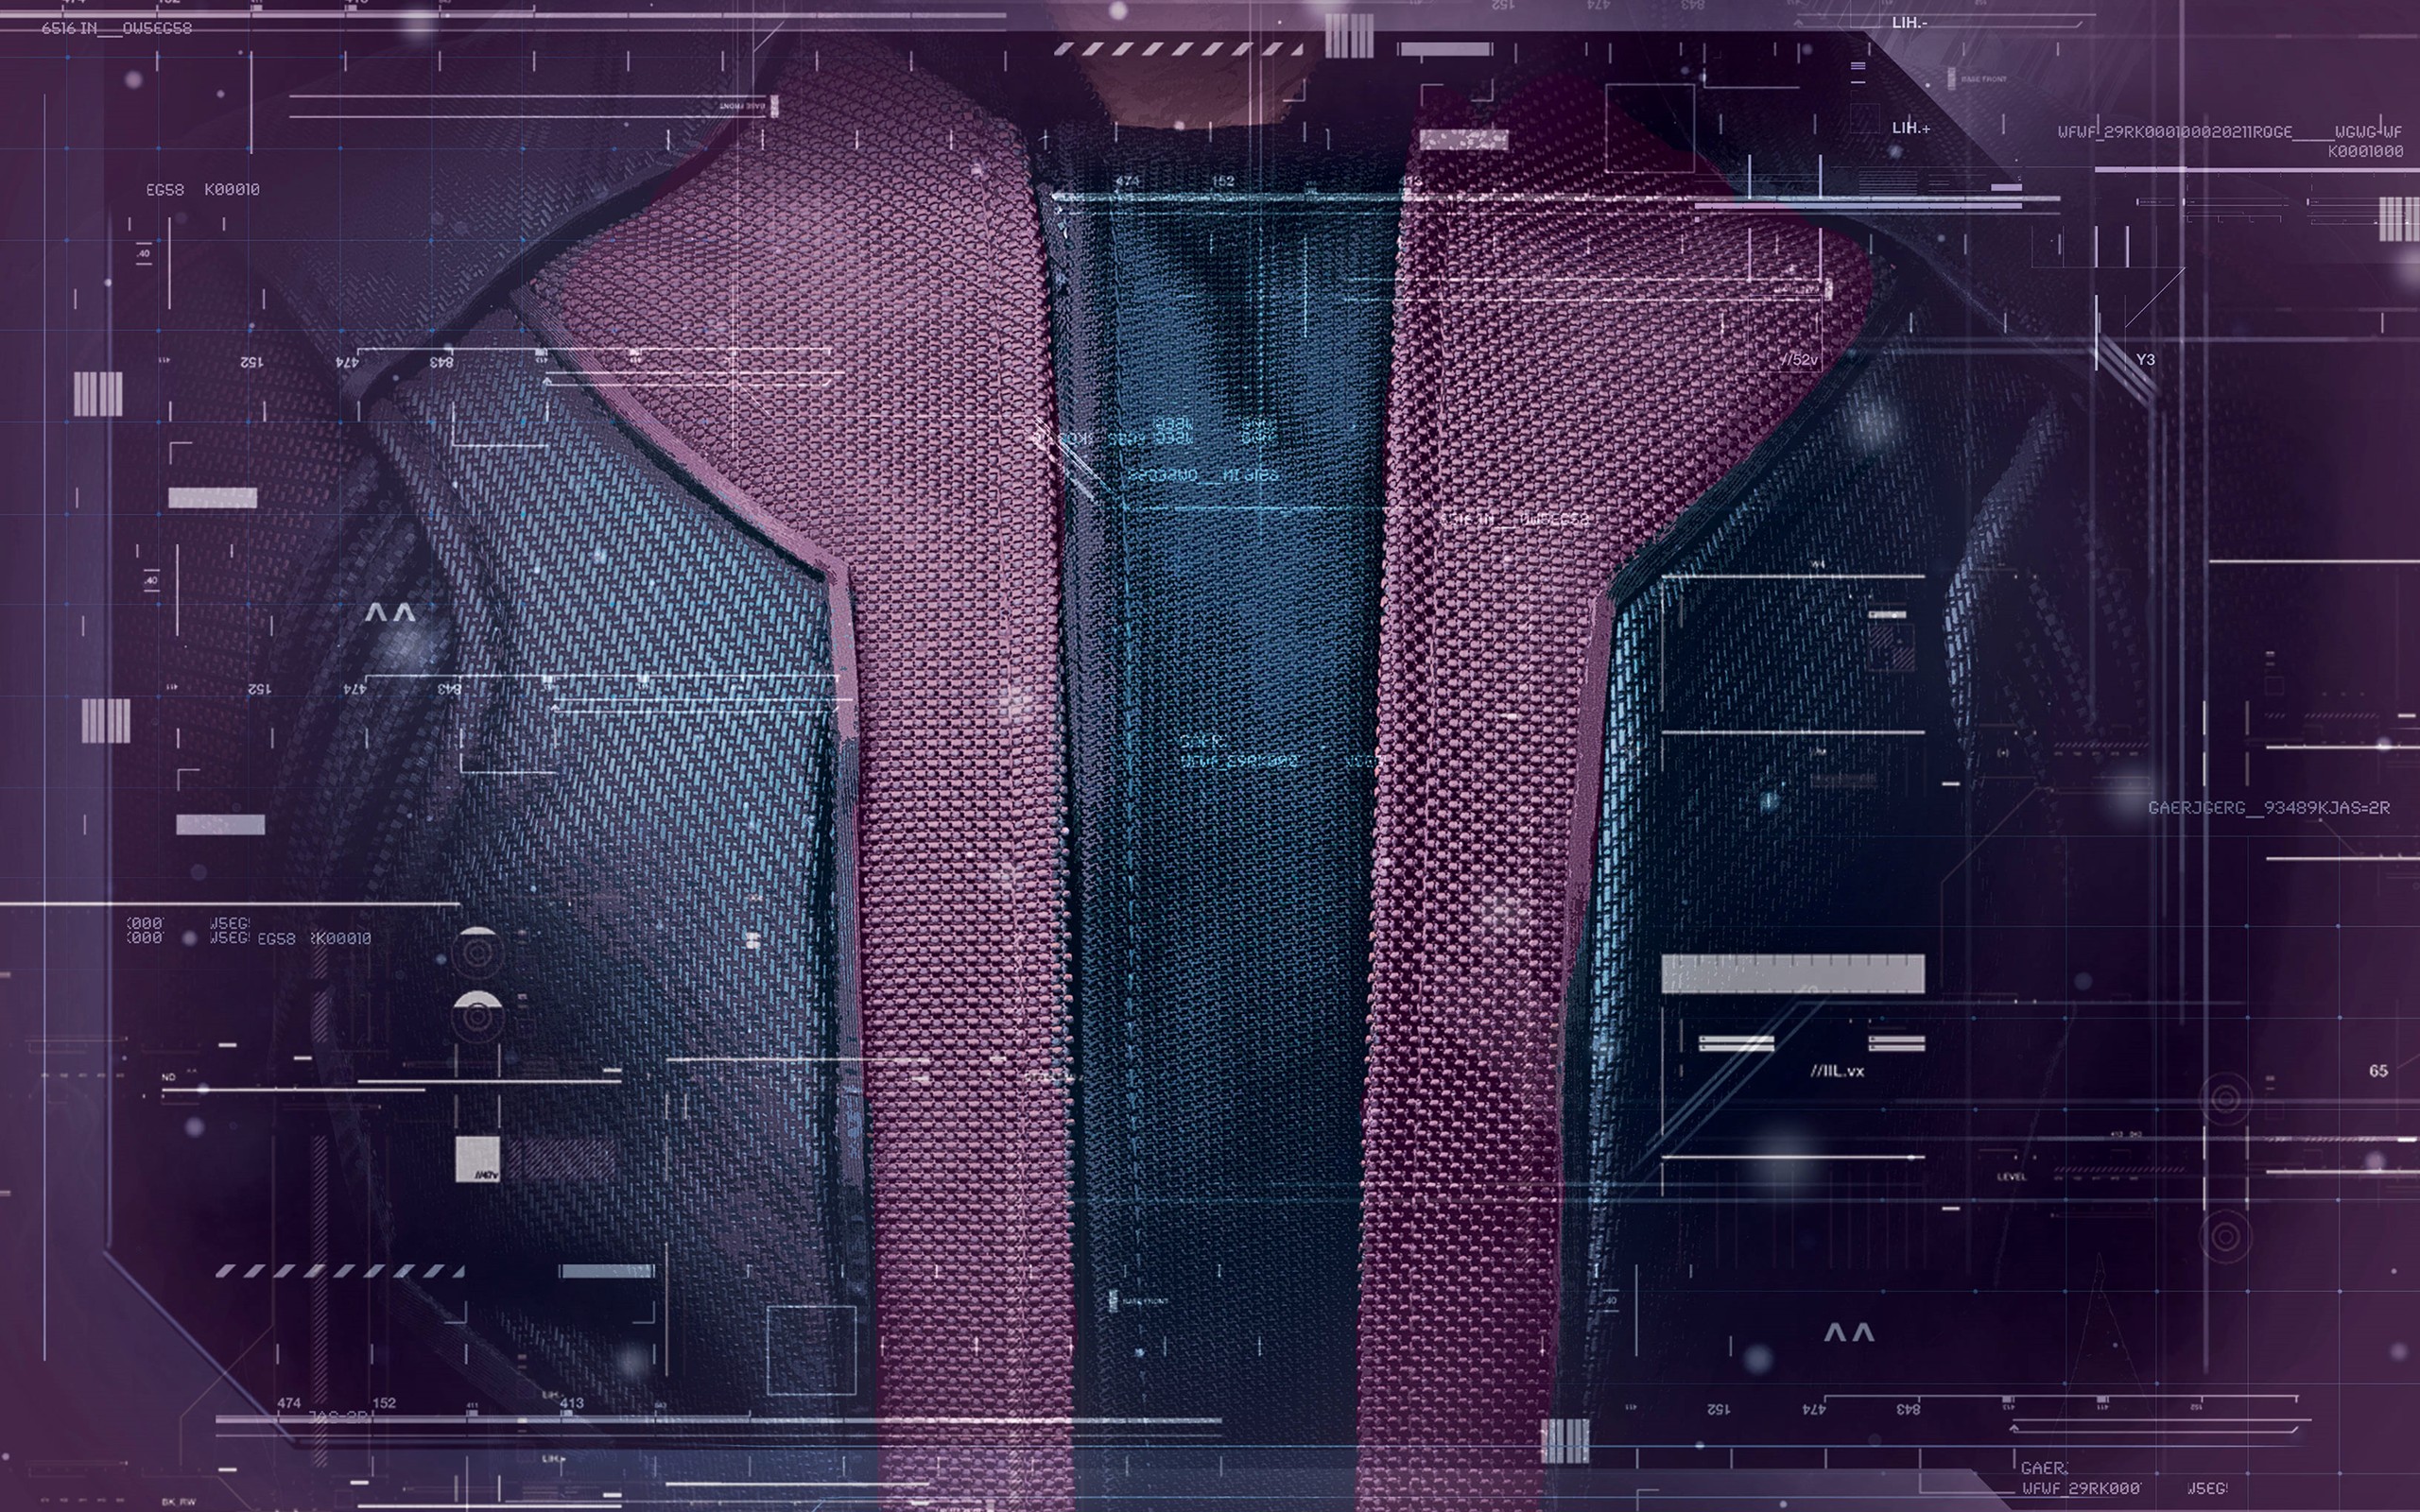 The Avengers, Avengers: Age of Ultron, Superhero, Costumes, Lines, Technology, Hawkeye, Purple background, Interfaces Wallpaper